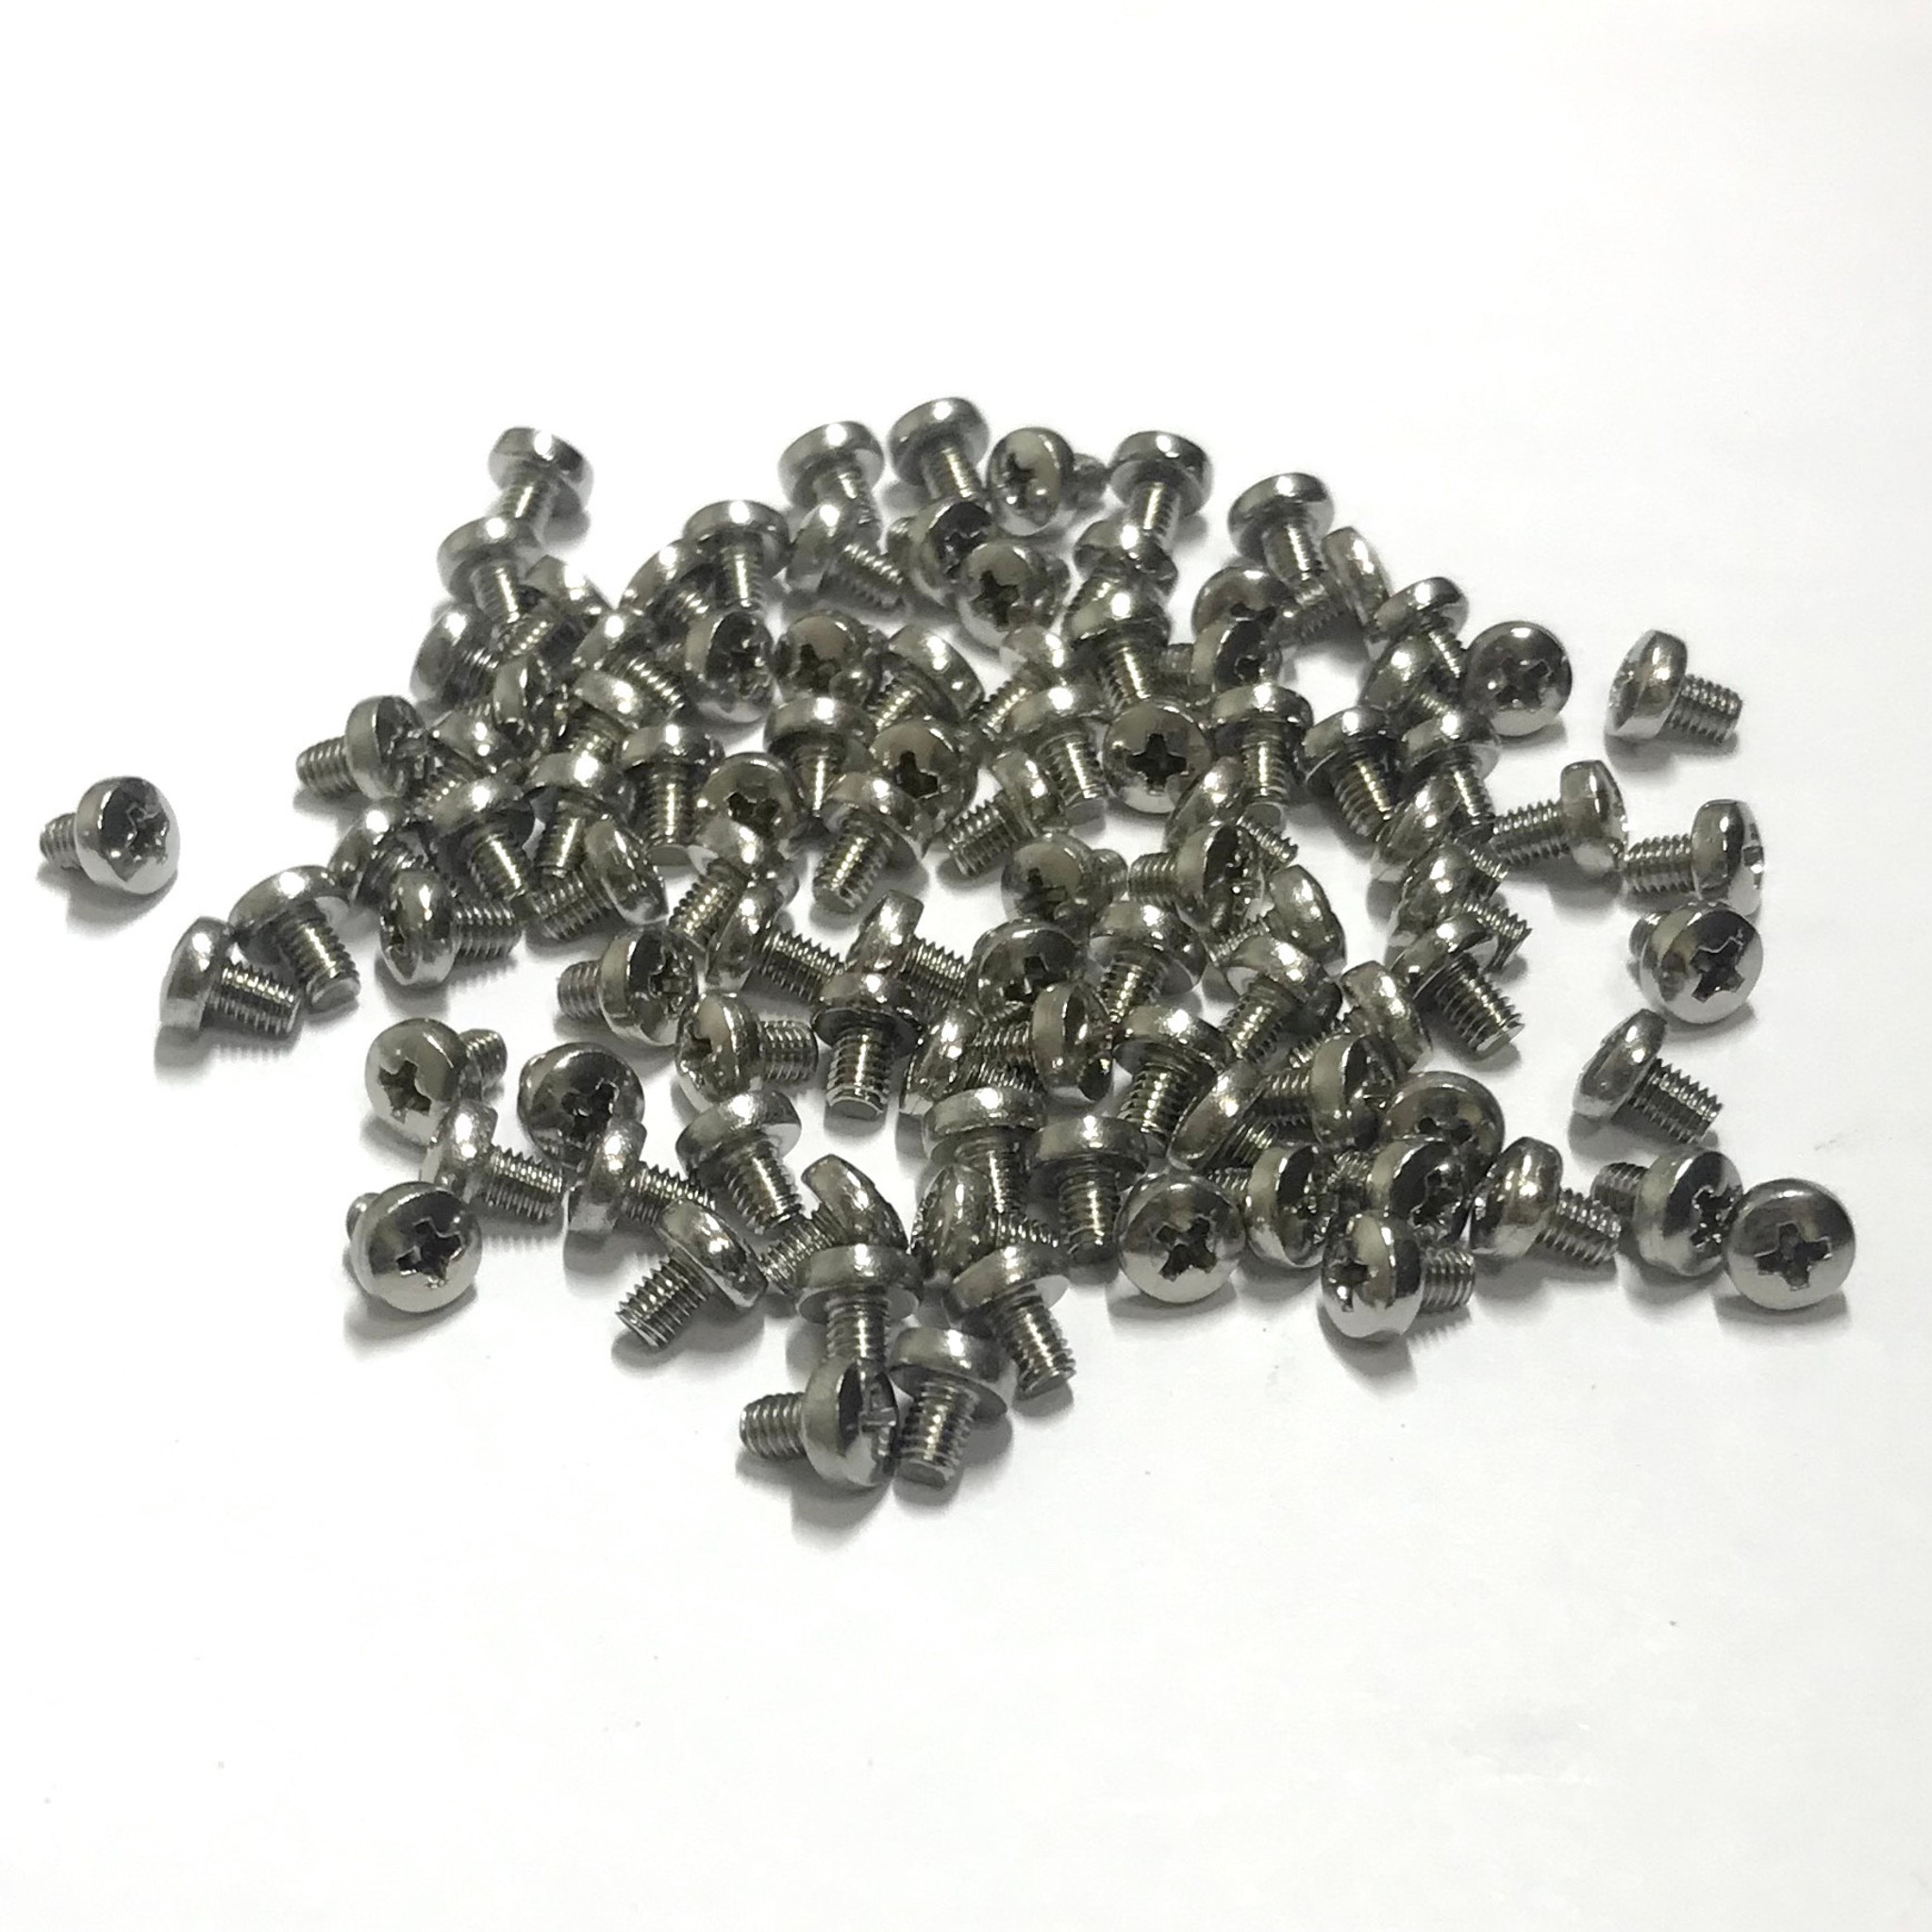 PKG of 100) M3-0.5 x 4 mm Machine Screw, Phillips Pan Head, A2 Stainless,  M3x4 - orchidsound electronics